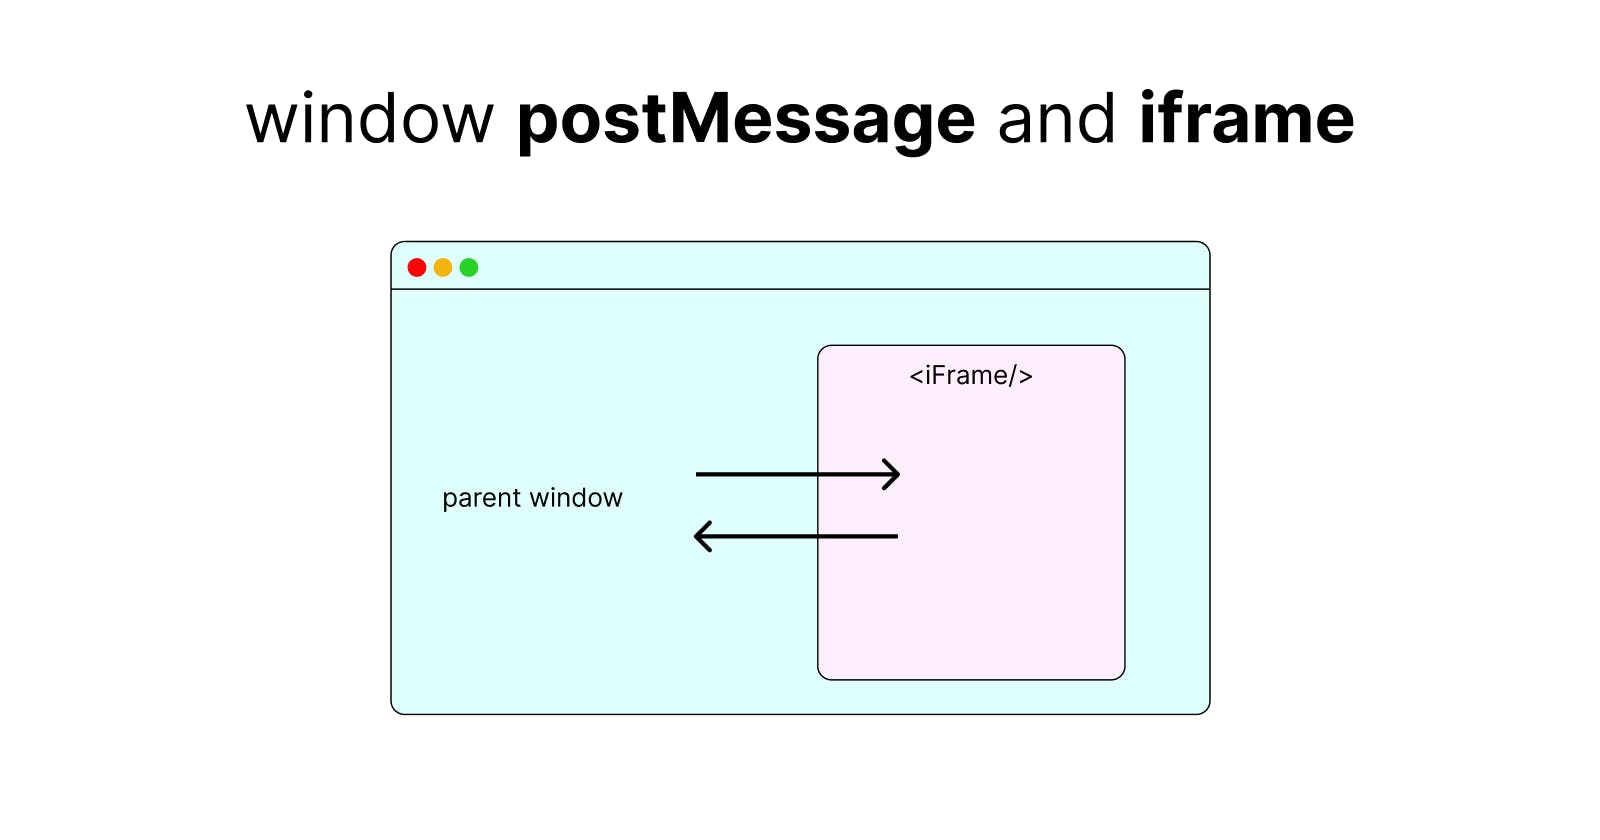 Mastering the Art of Communicating between Window postMessage and iframe in JavaScript: A Beginner's Guide